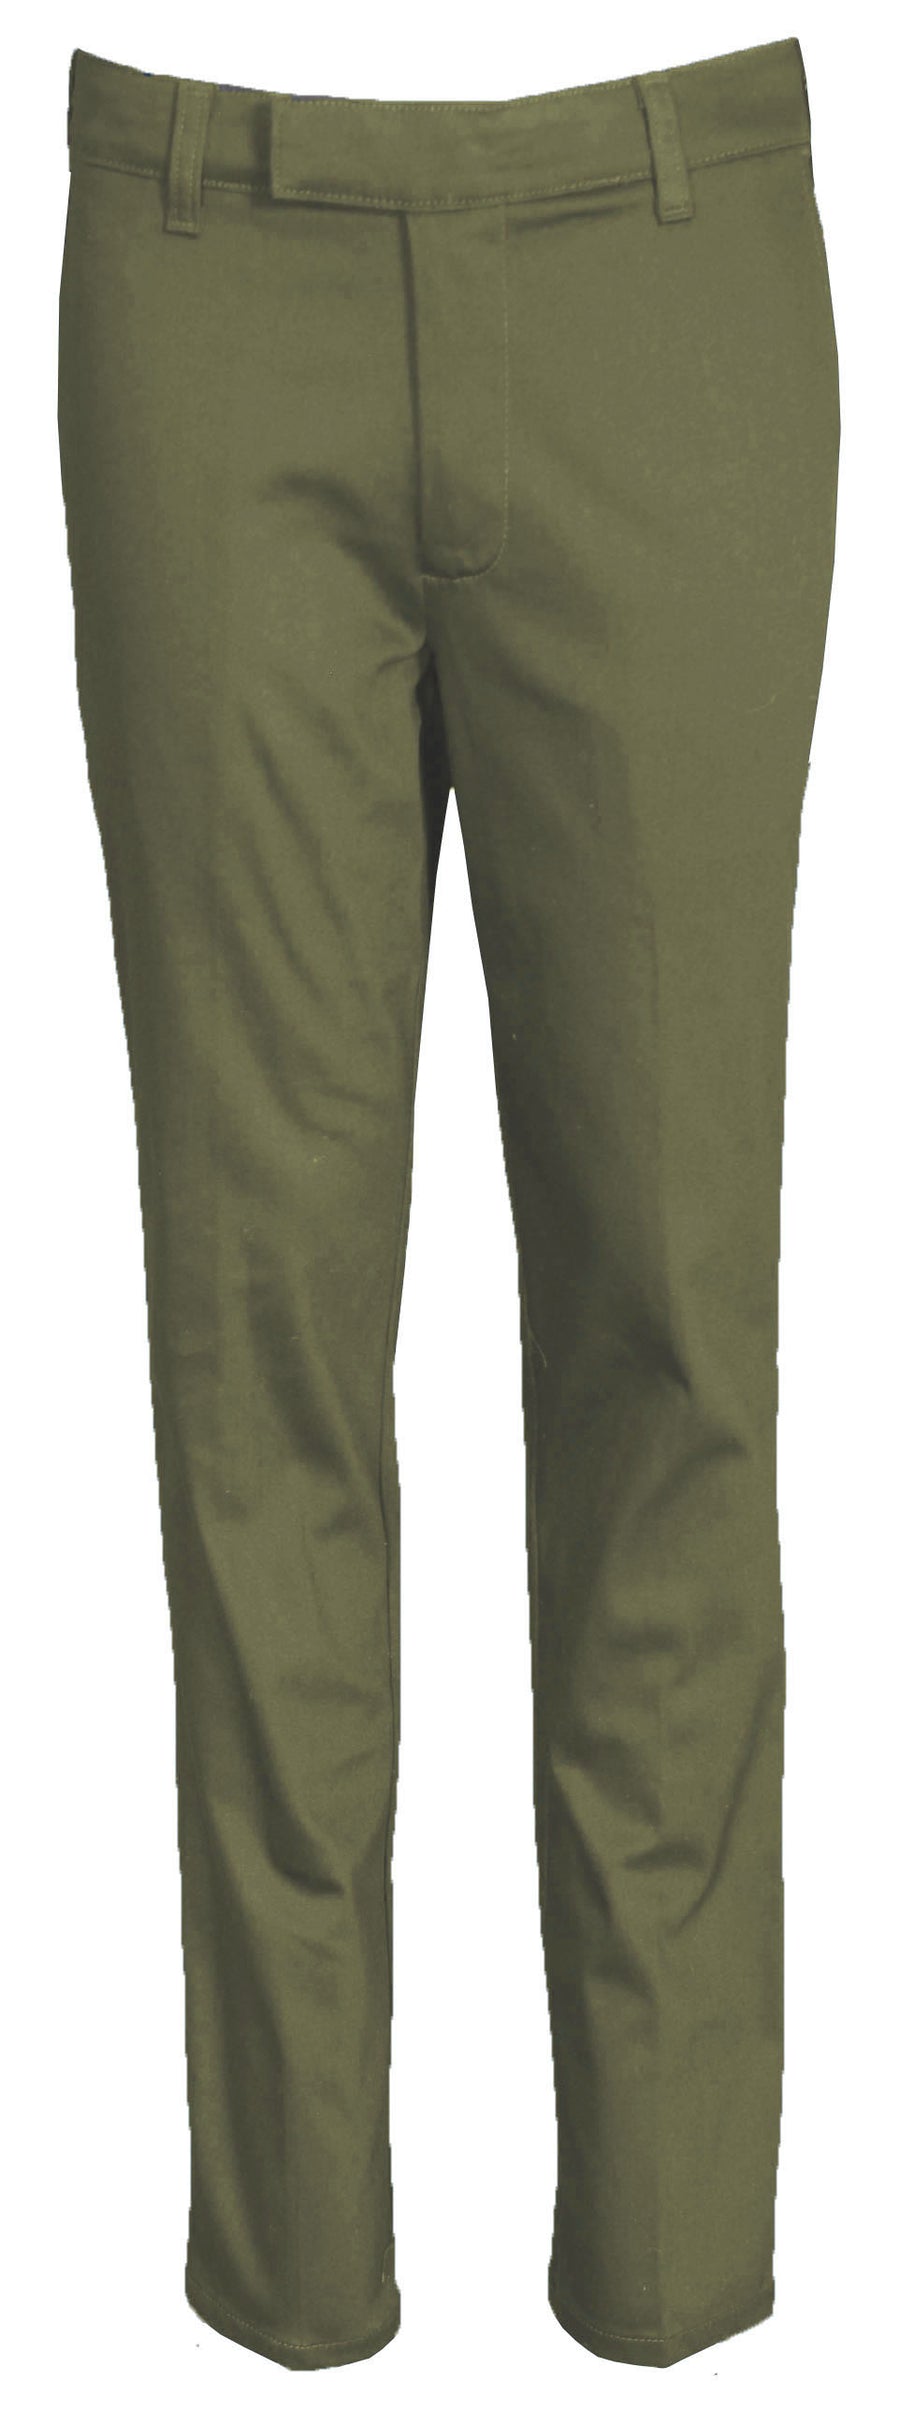 NIA GIRL CONTEMPORY SLENDER FIT PANT